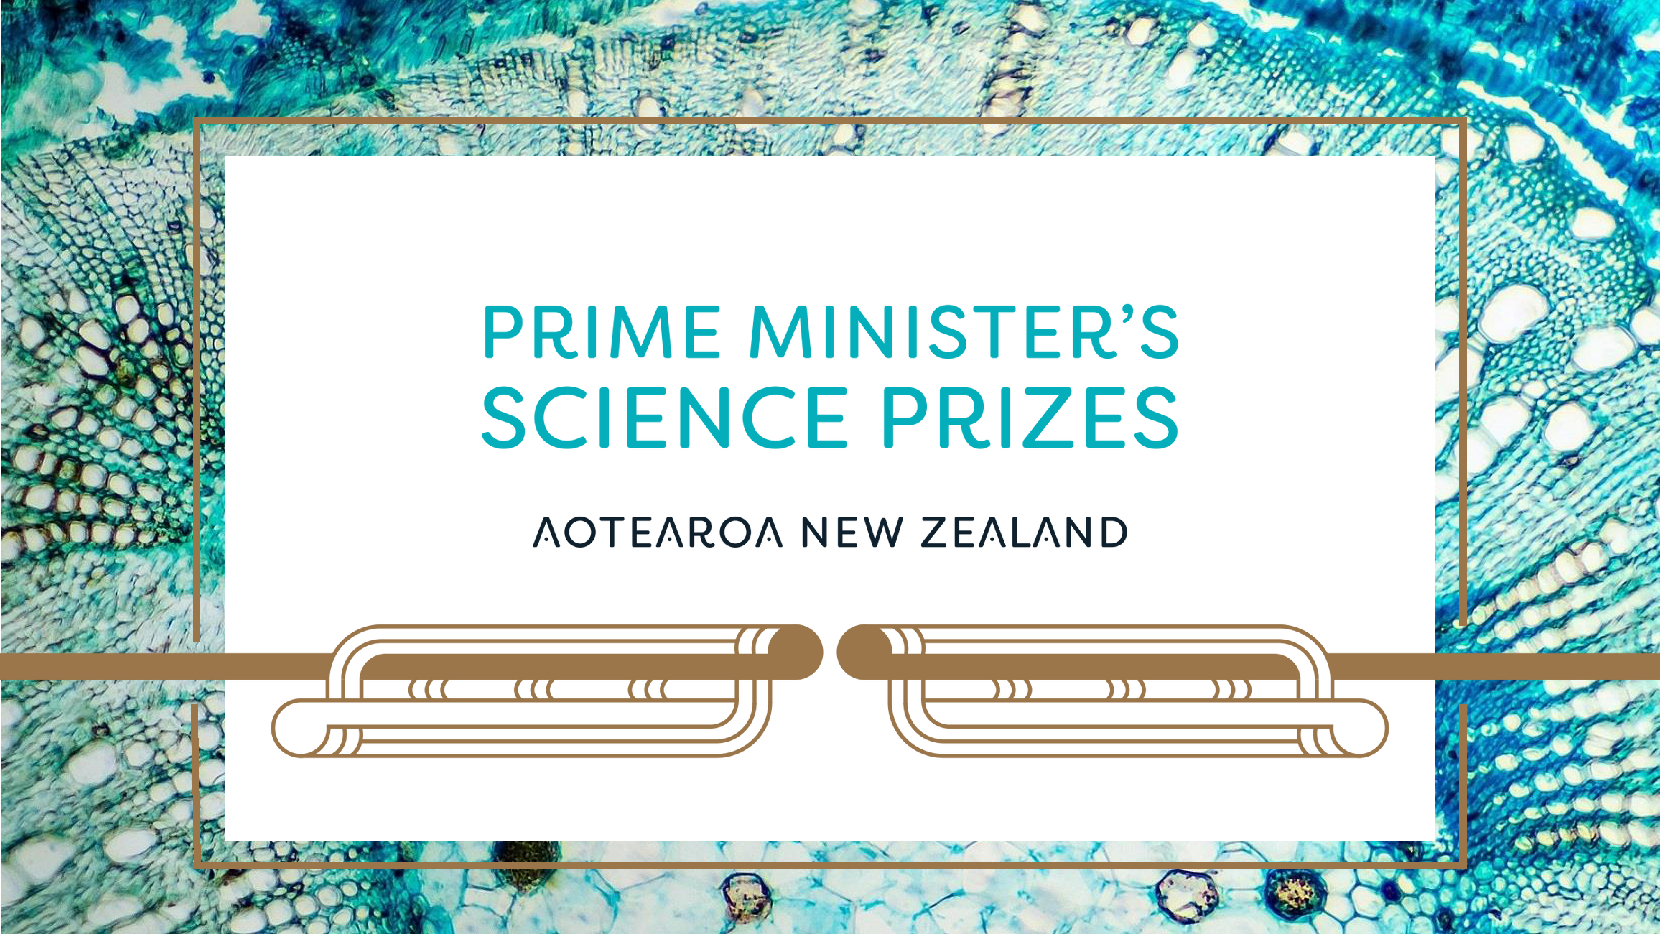 Image:Prime Minister’s science prizes recognise work in cancer genetics, psychology of music, communication of volcanic risk, student engagement, and soil science